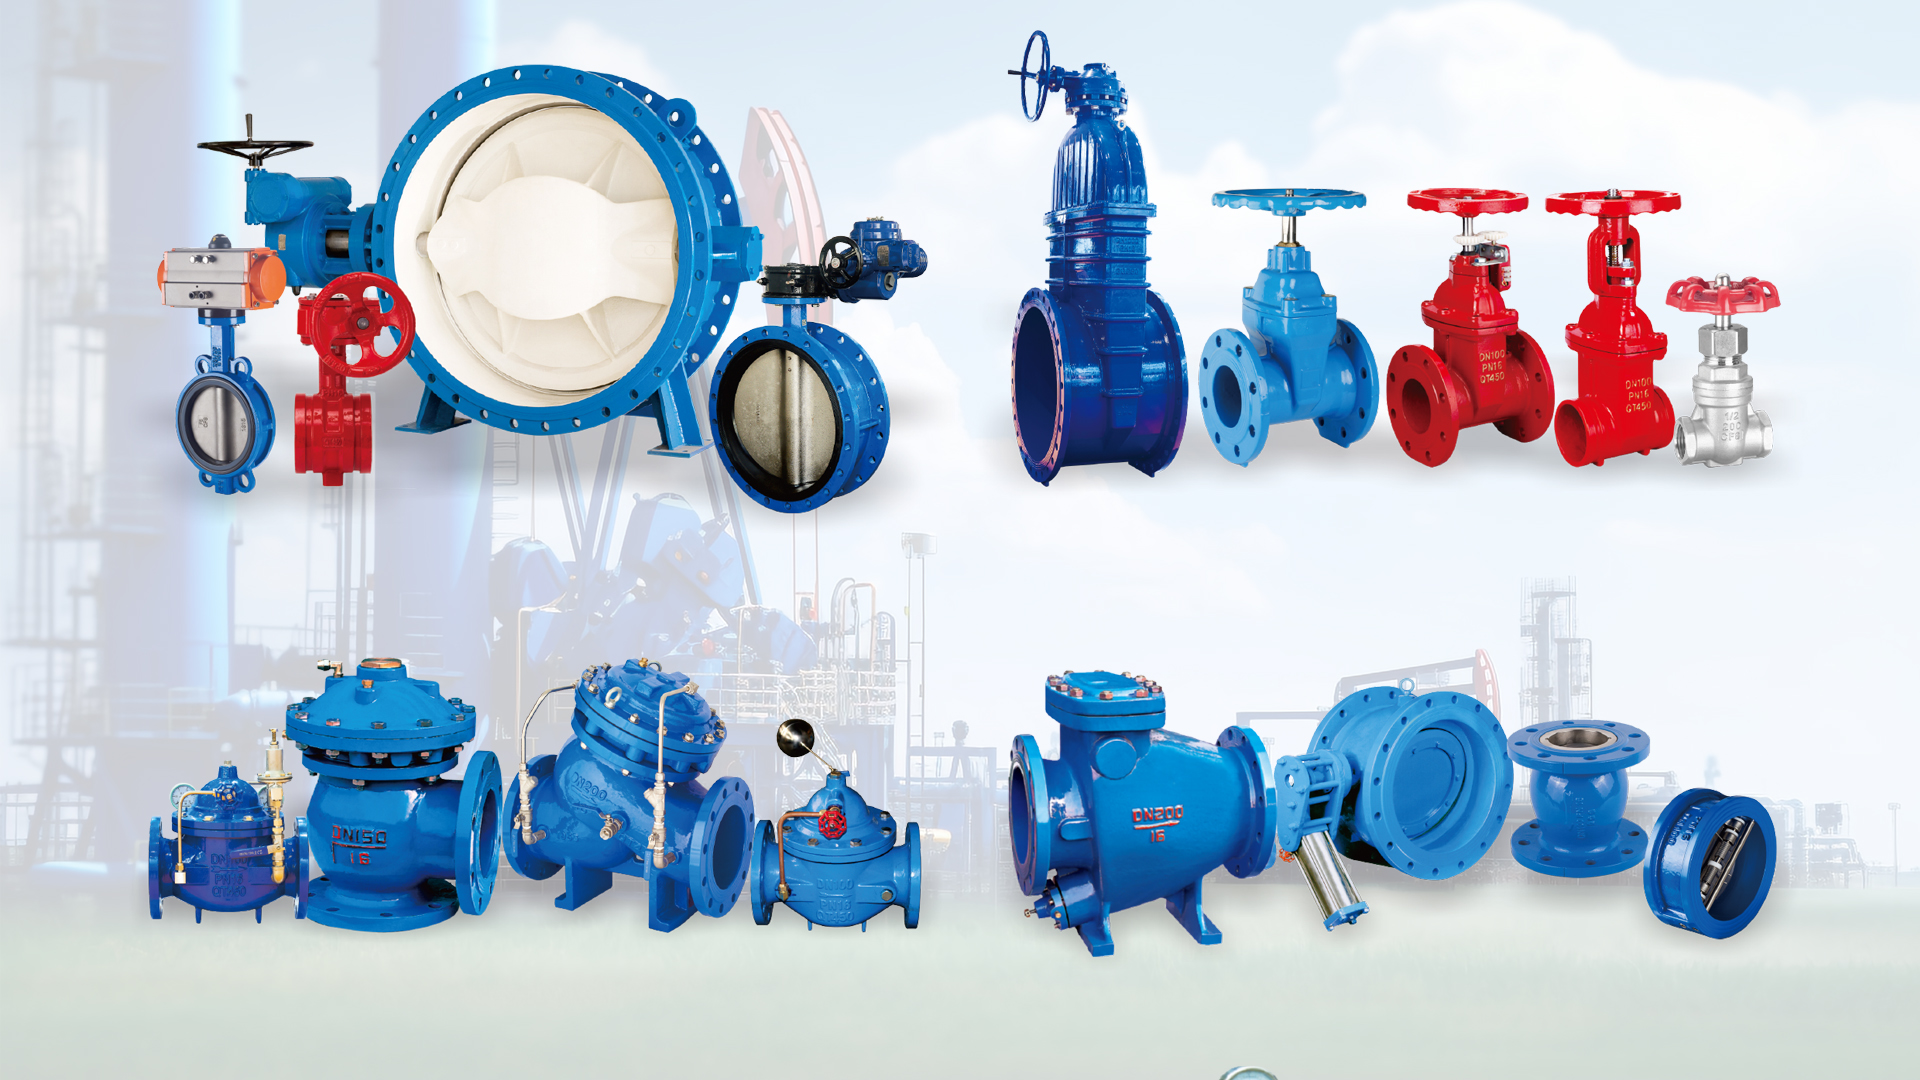 Chinese gate valve, Chinese globe valve and Chinese check valve: in-depth analysis of their respective functions and uses